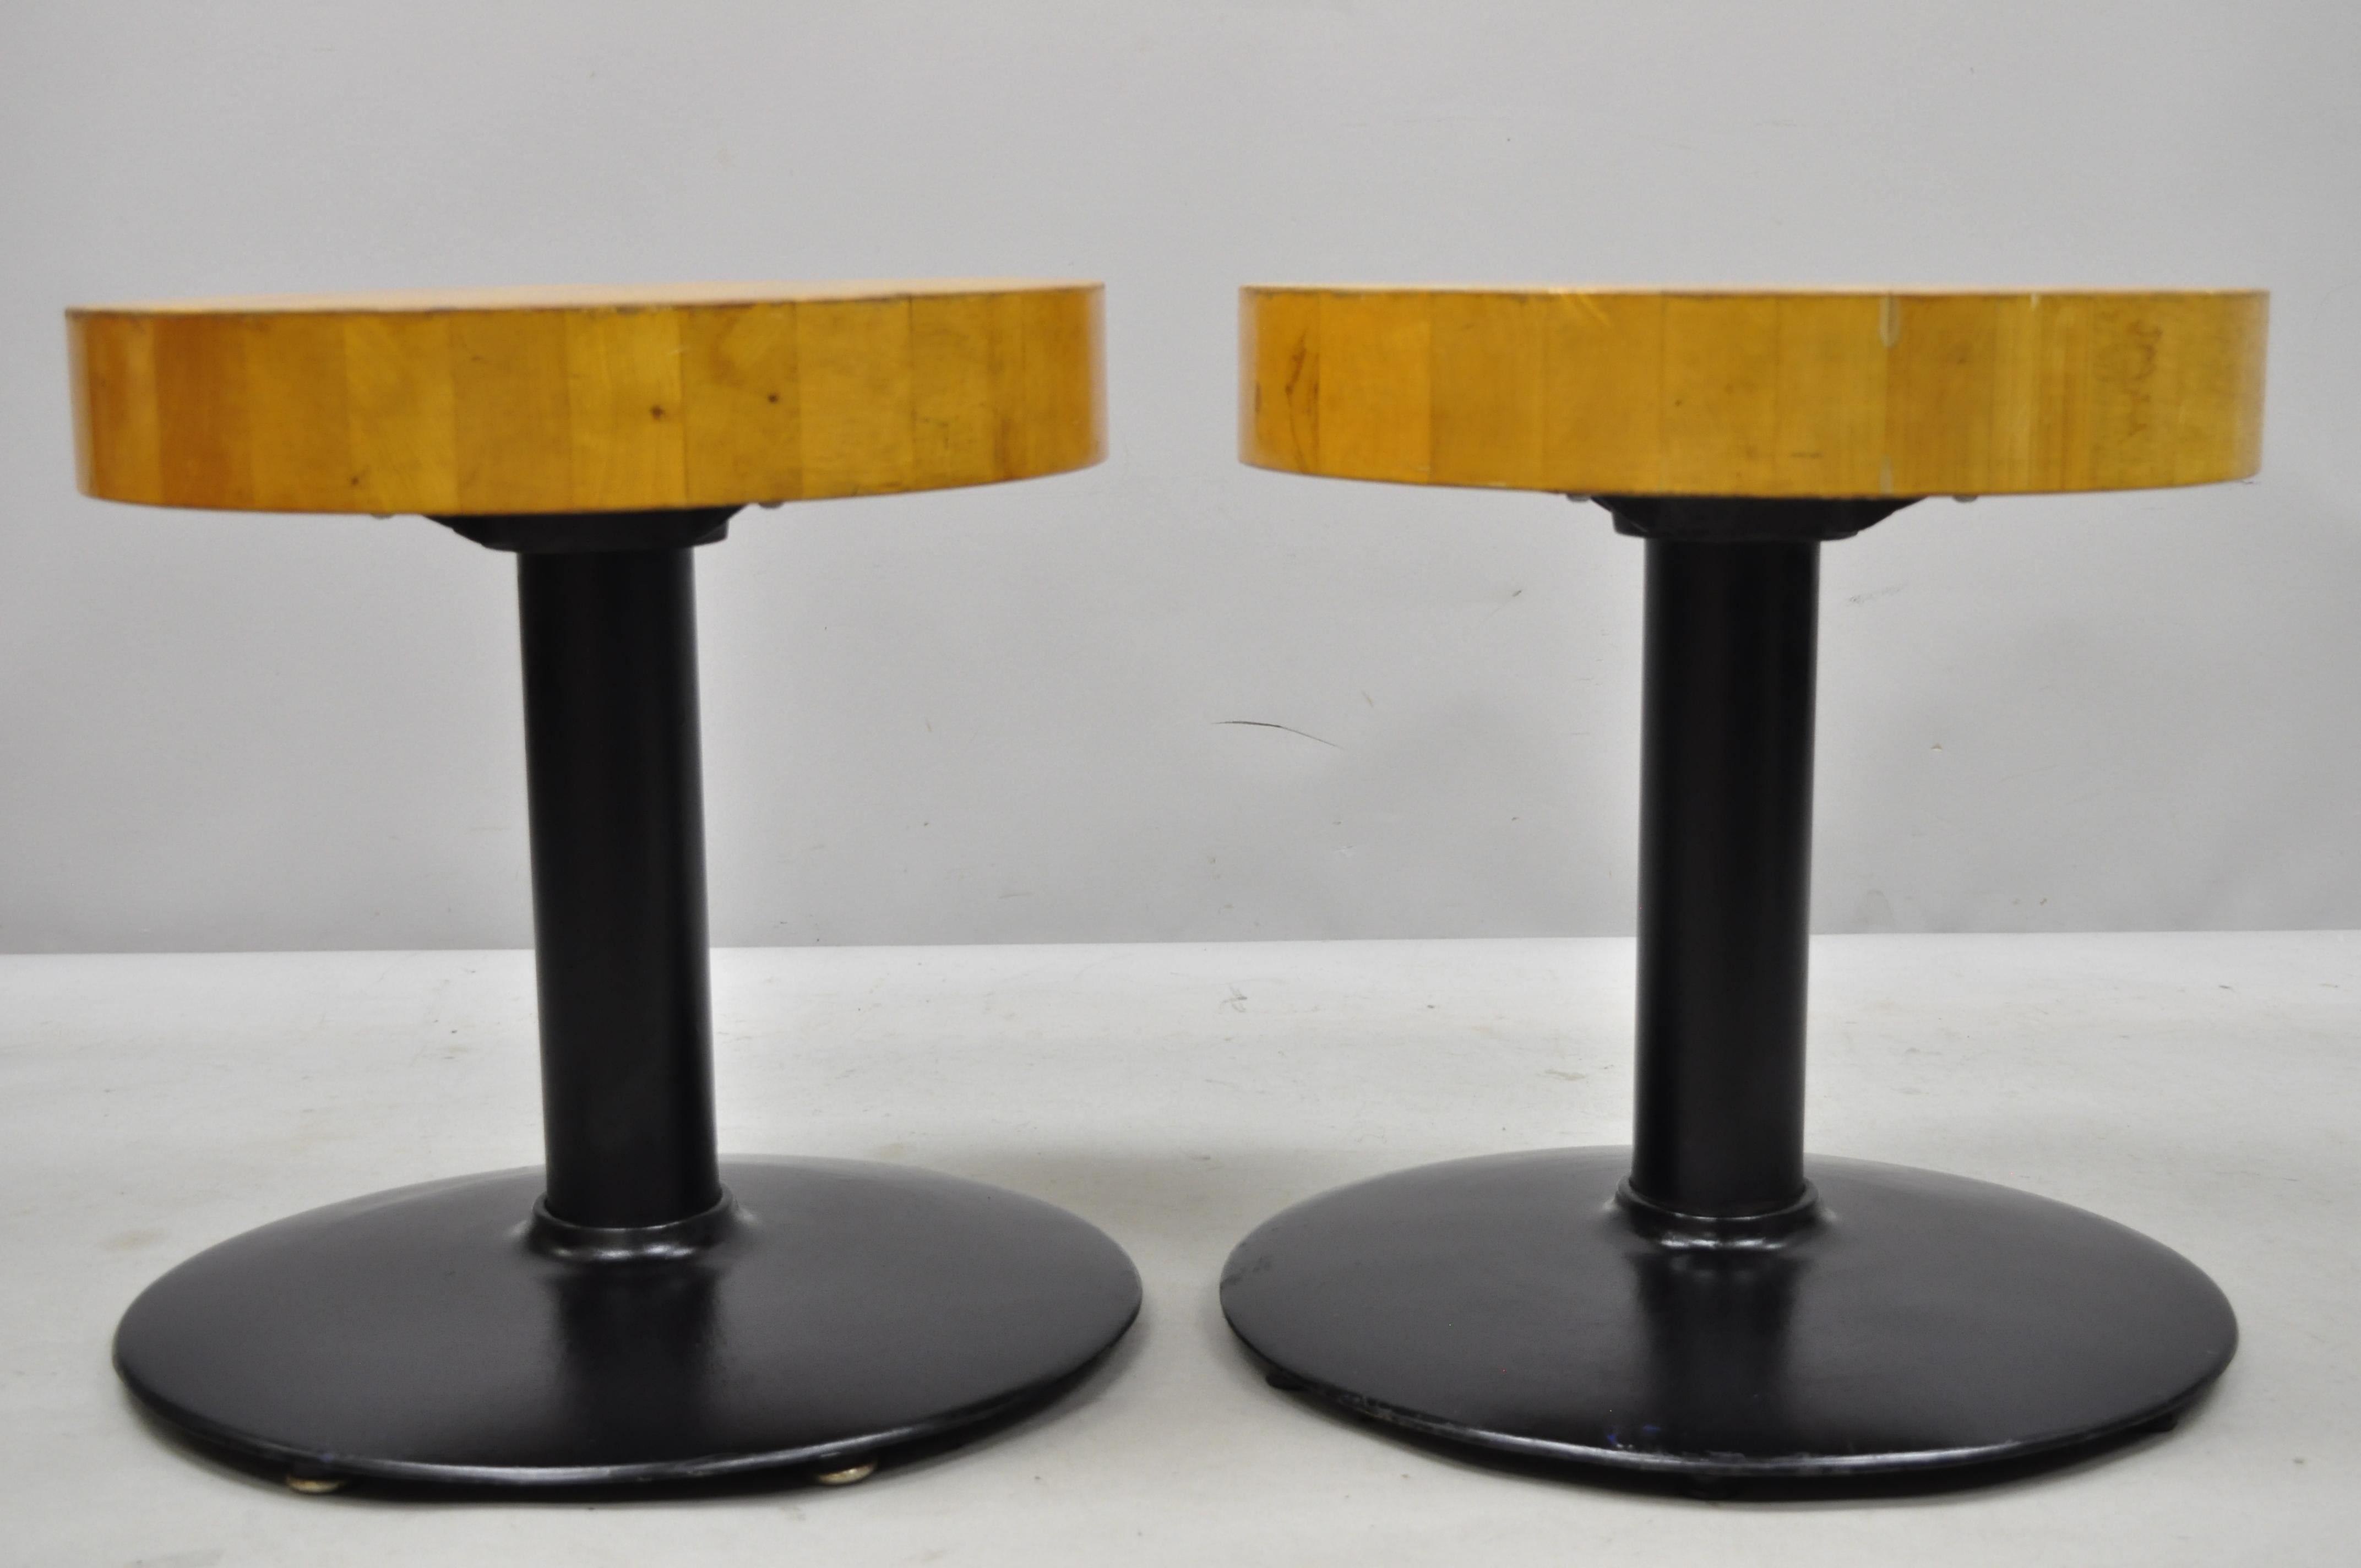 Pair of vintage round butcher block wood industrial cast iron pedestal stools. Listing includes thick butcher block wooden seat, cast iron base with black painted finish, clean modernist lines, quality American craftsmanship. Each stool weighs